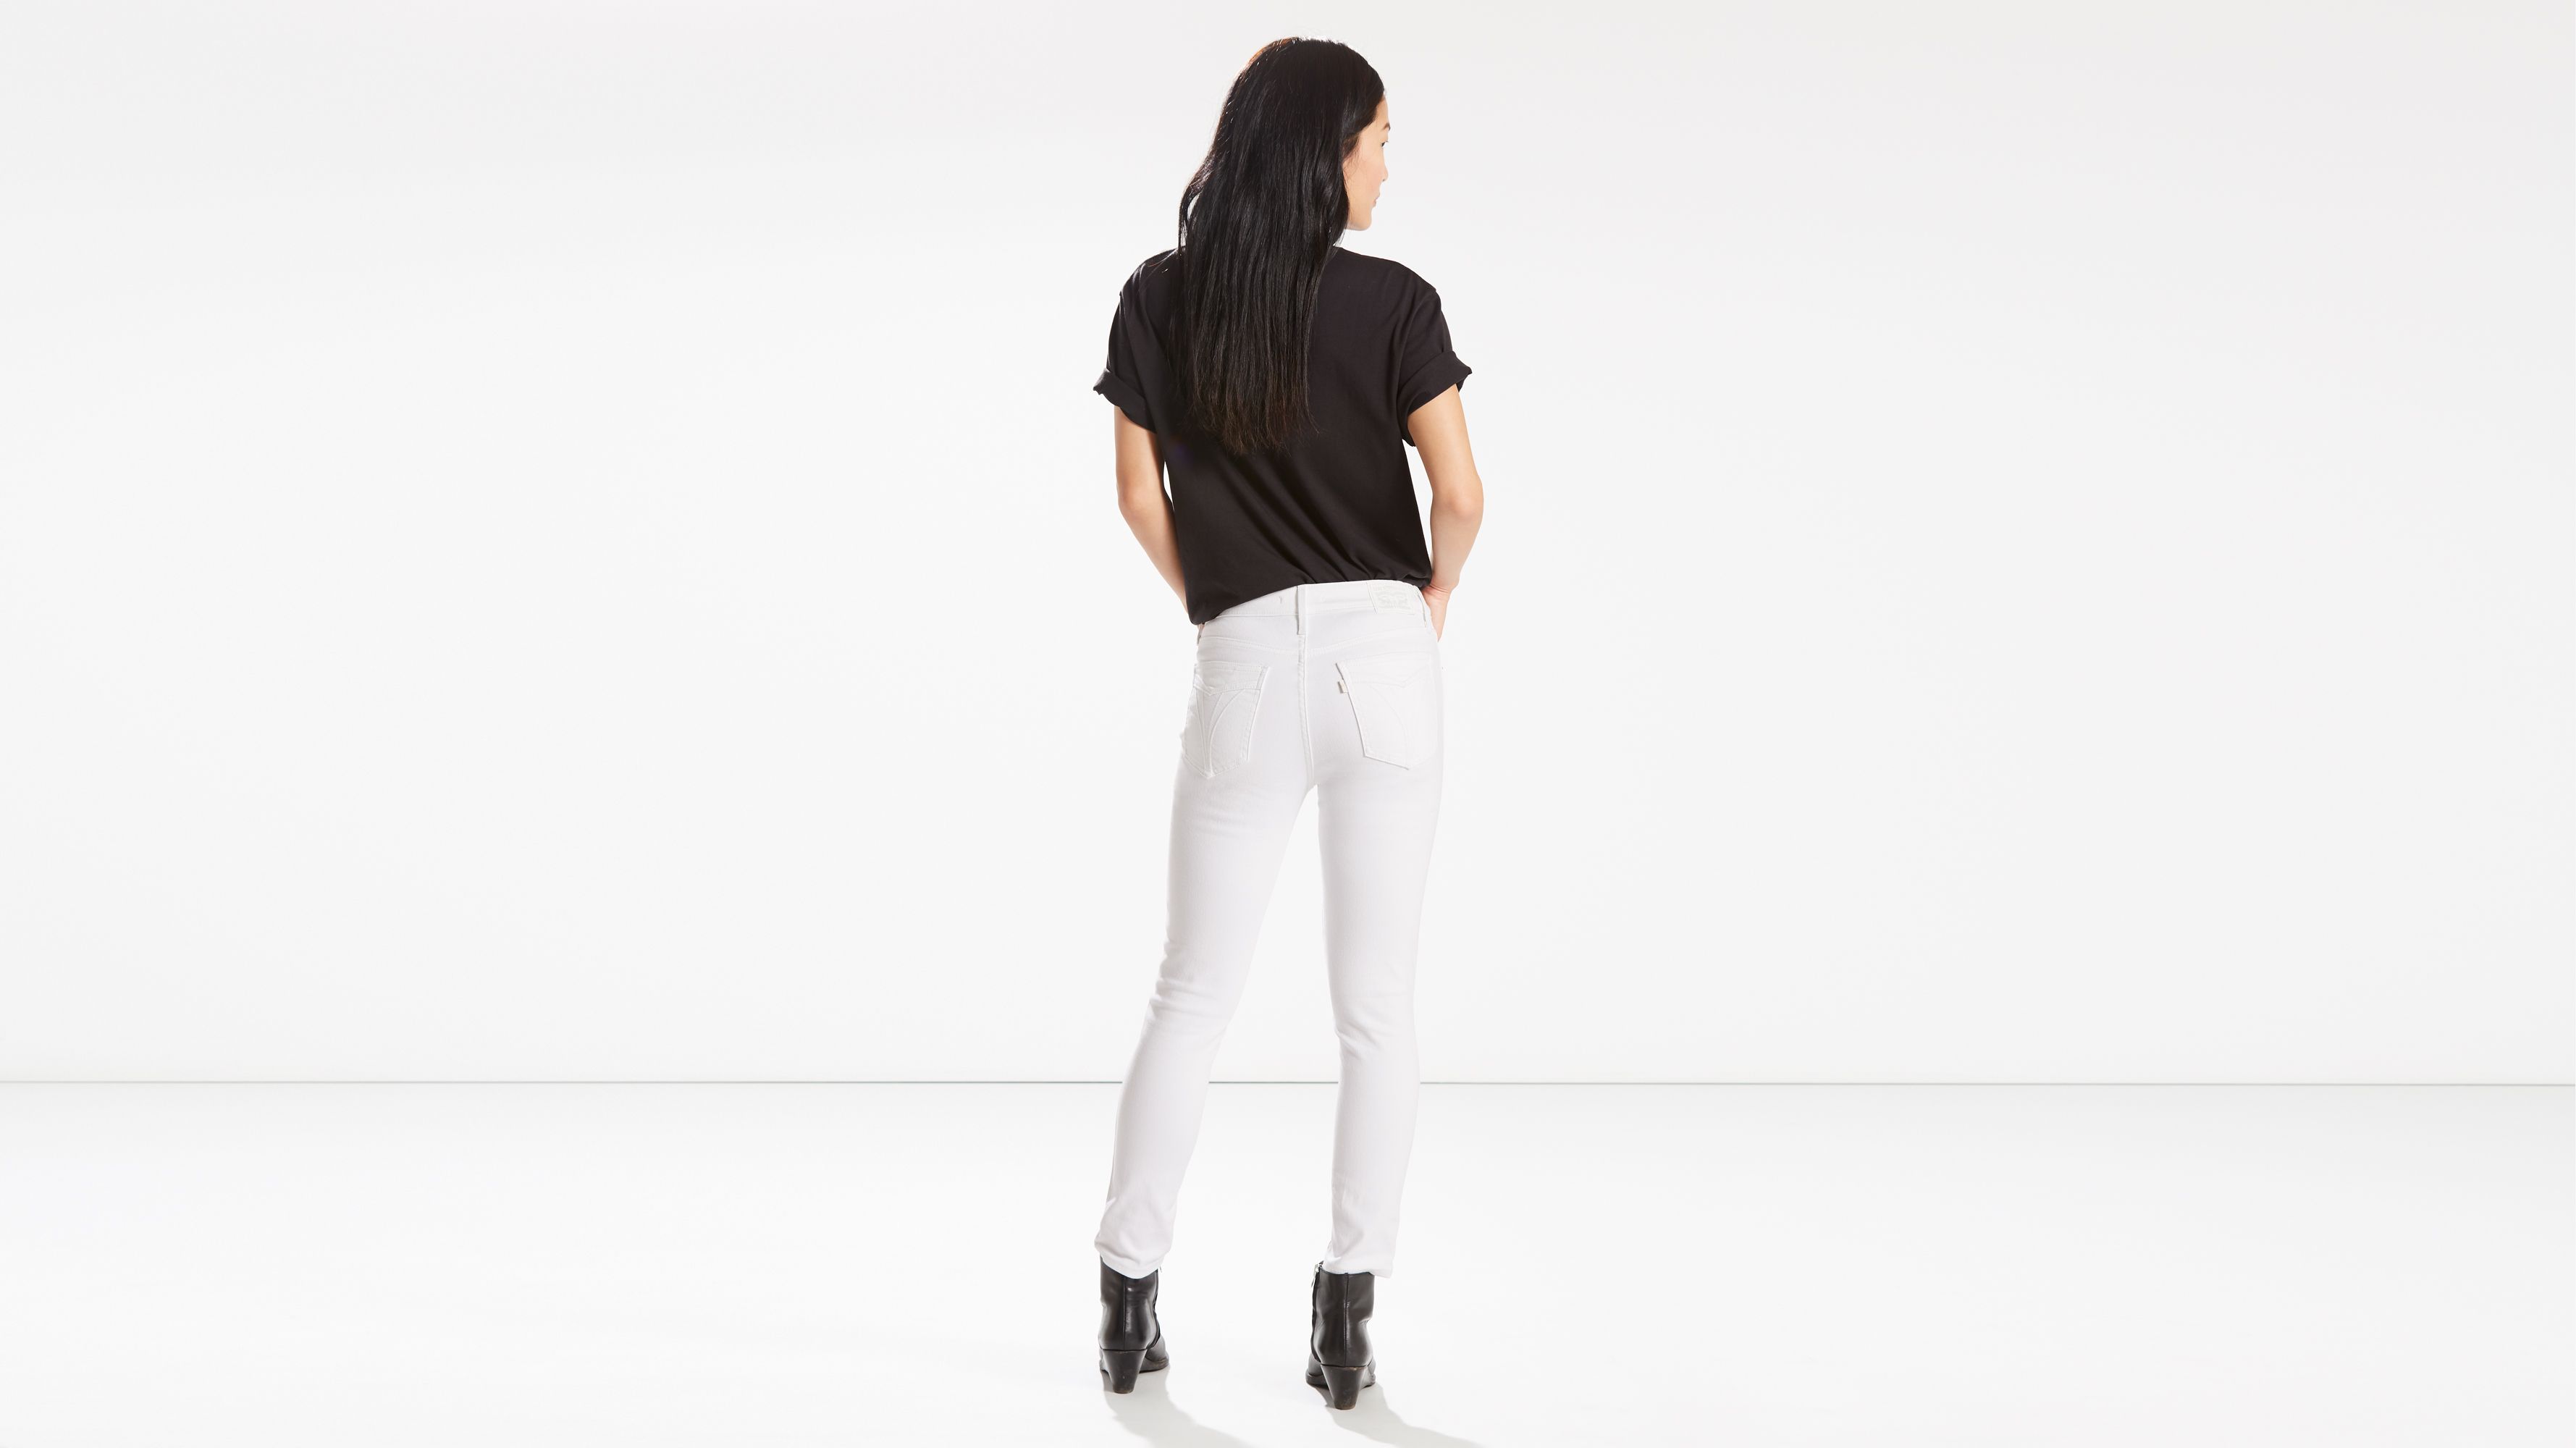 Buy > white ankle jeans > in stock